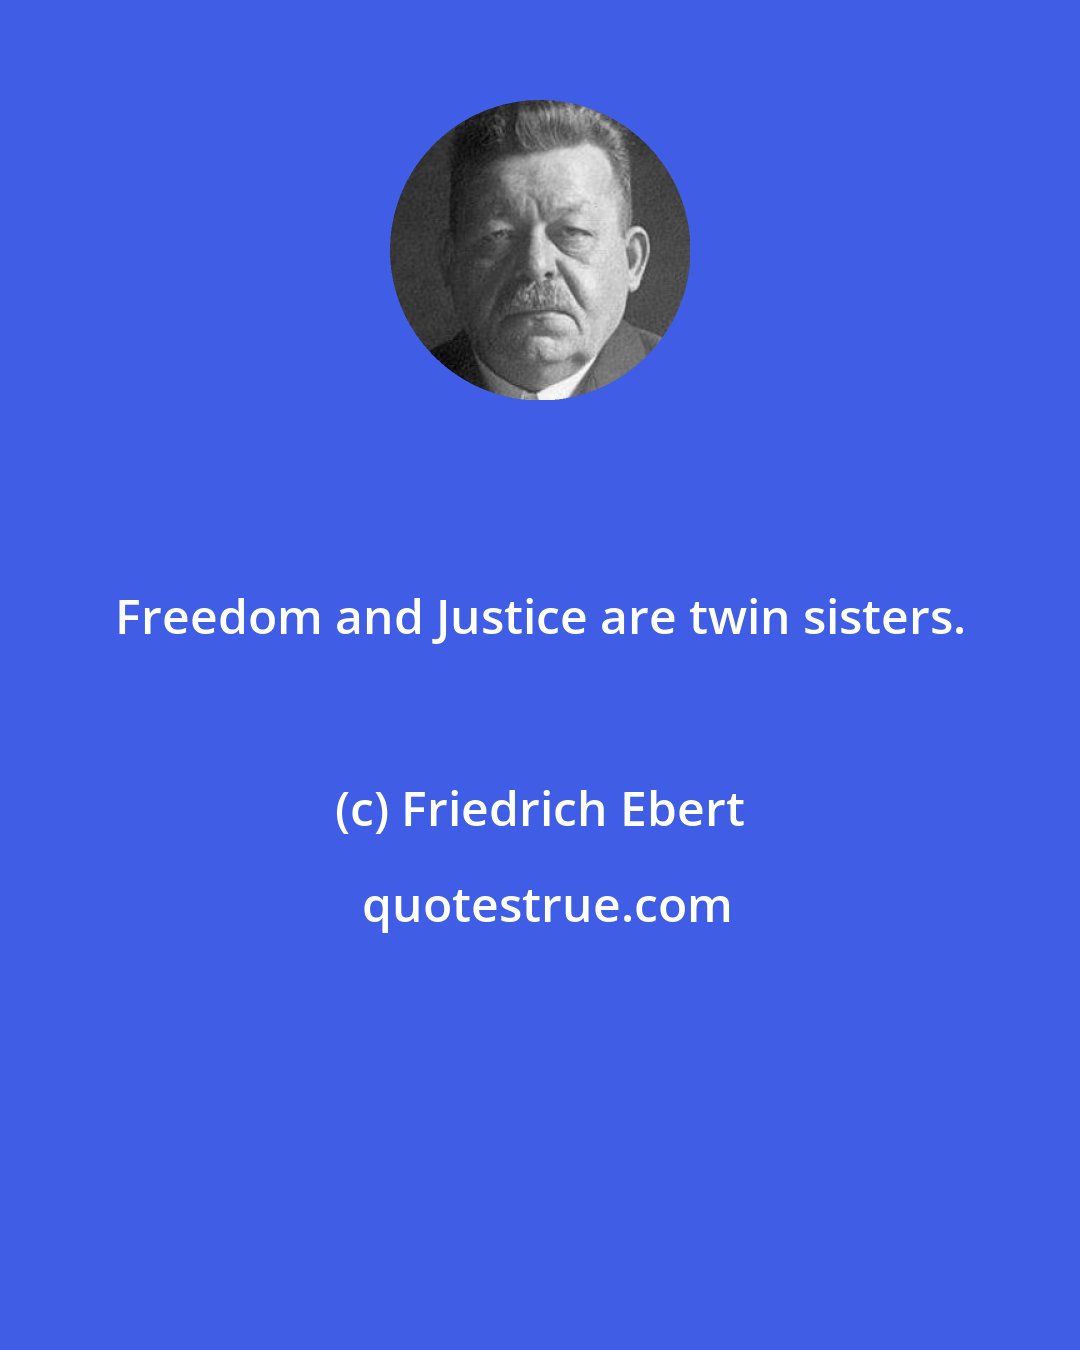 Friedrich Ebert: Freedom and Justice are twin sisters.